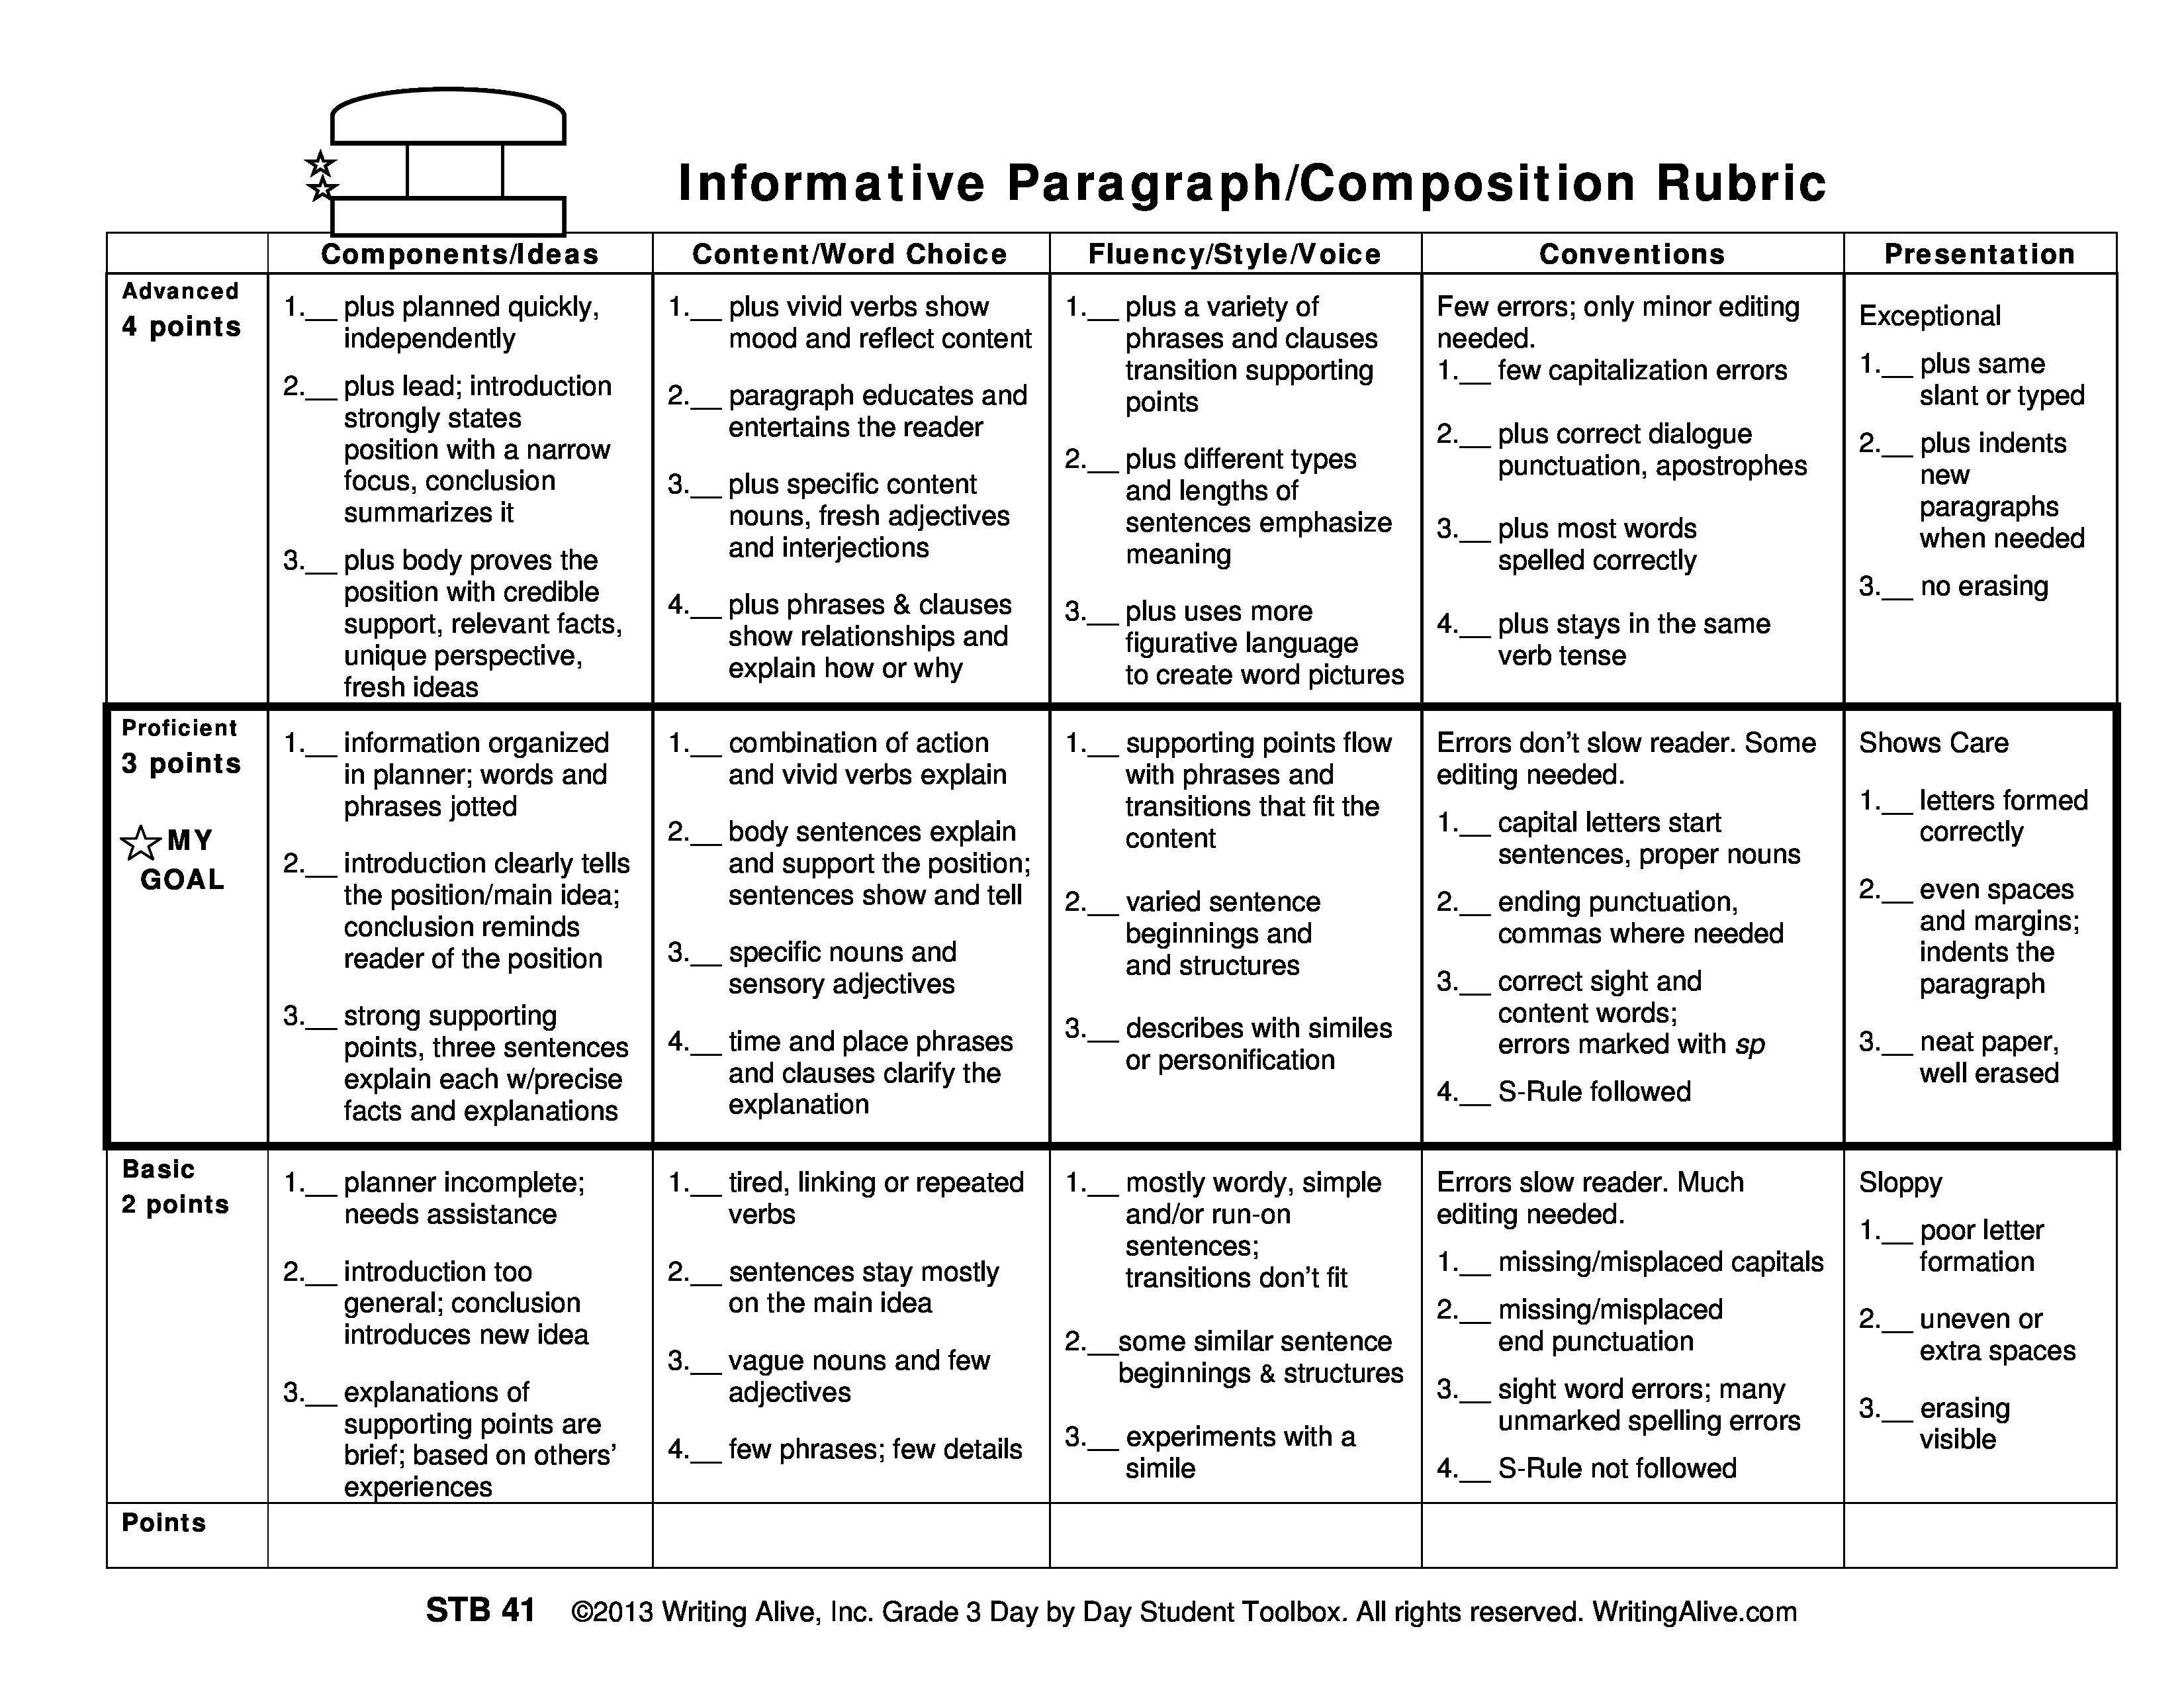 Grade 3 rubric for writing